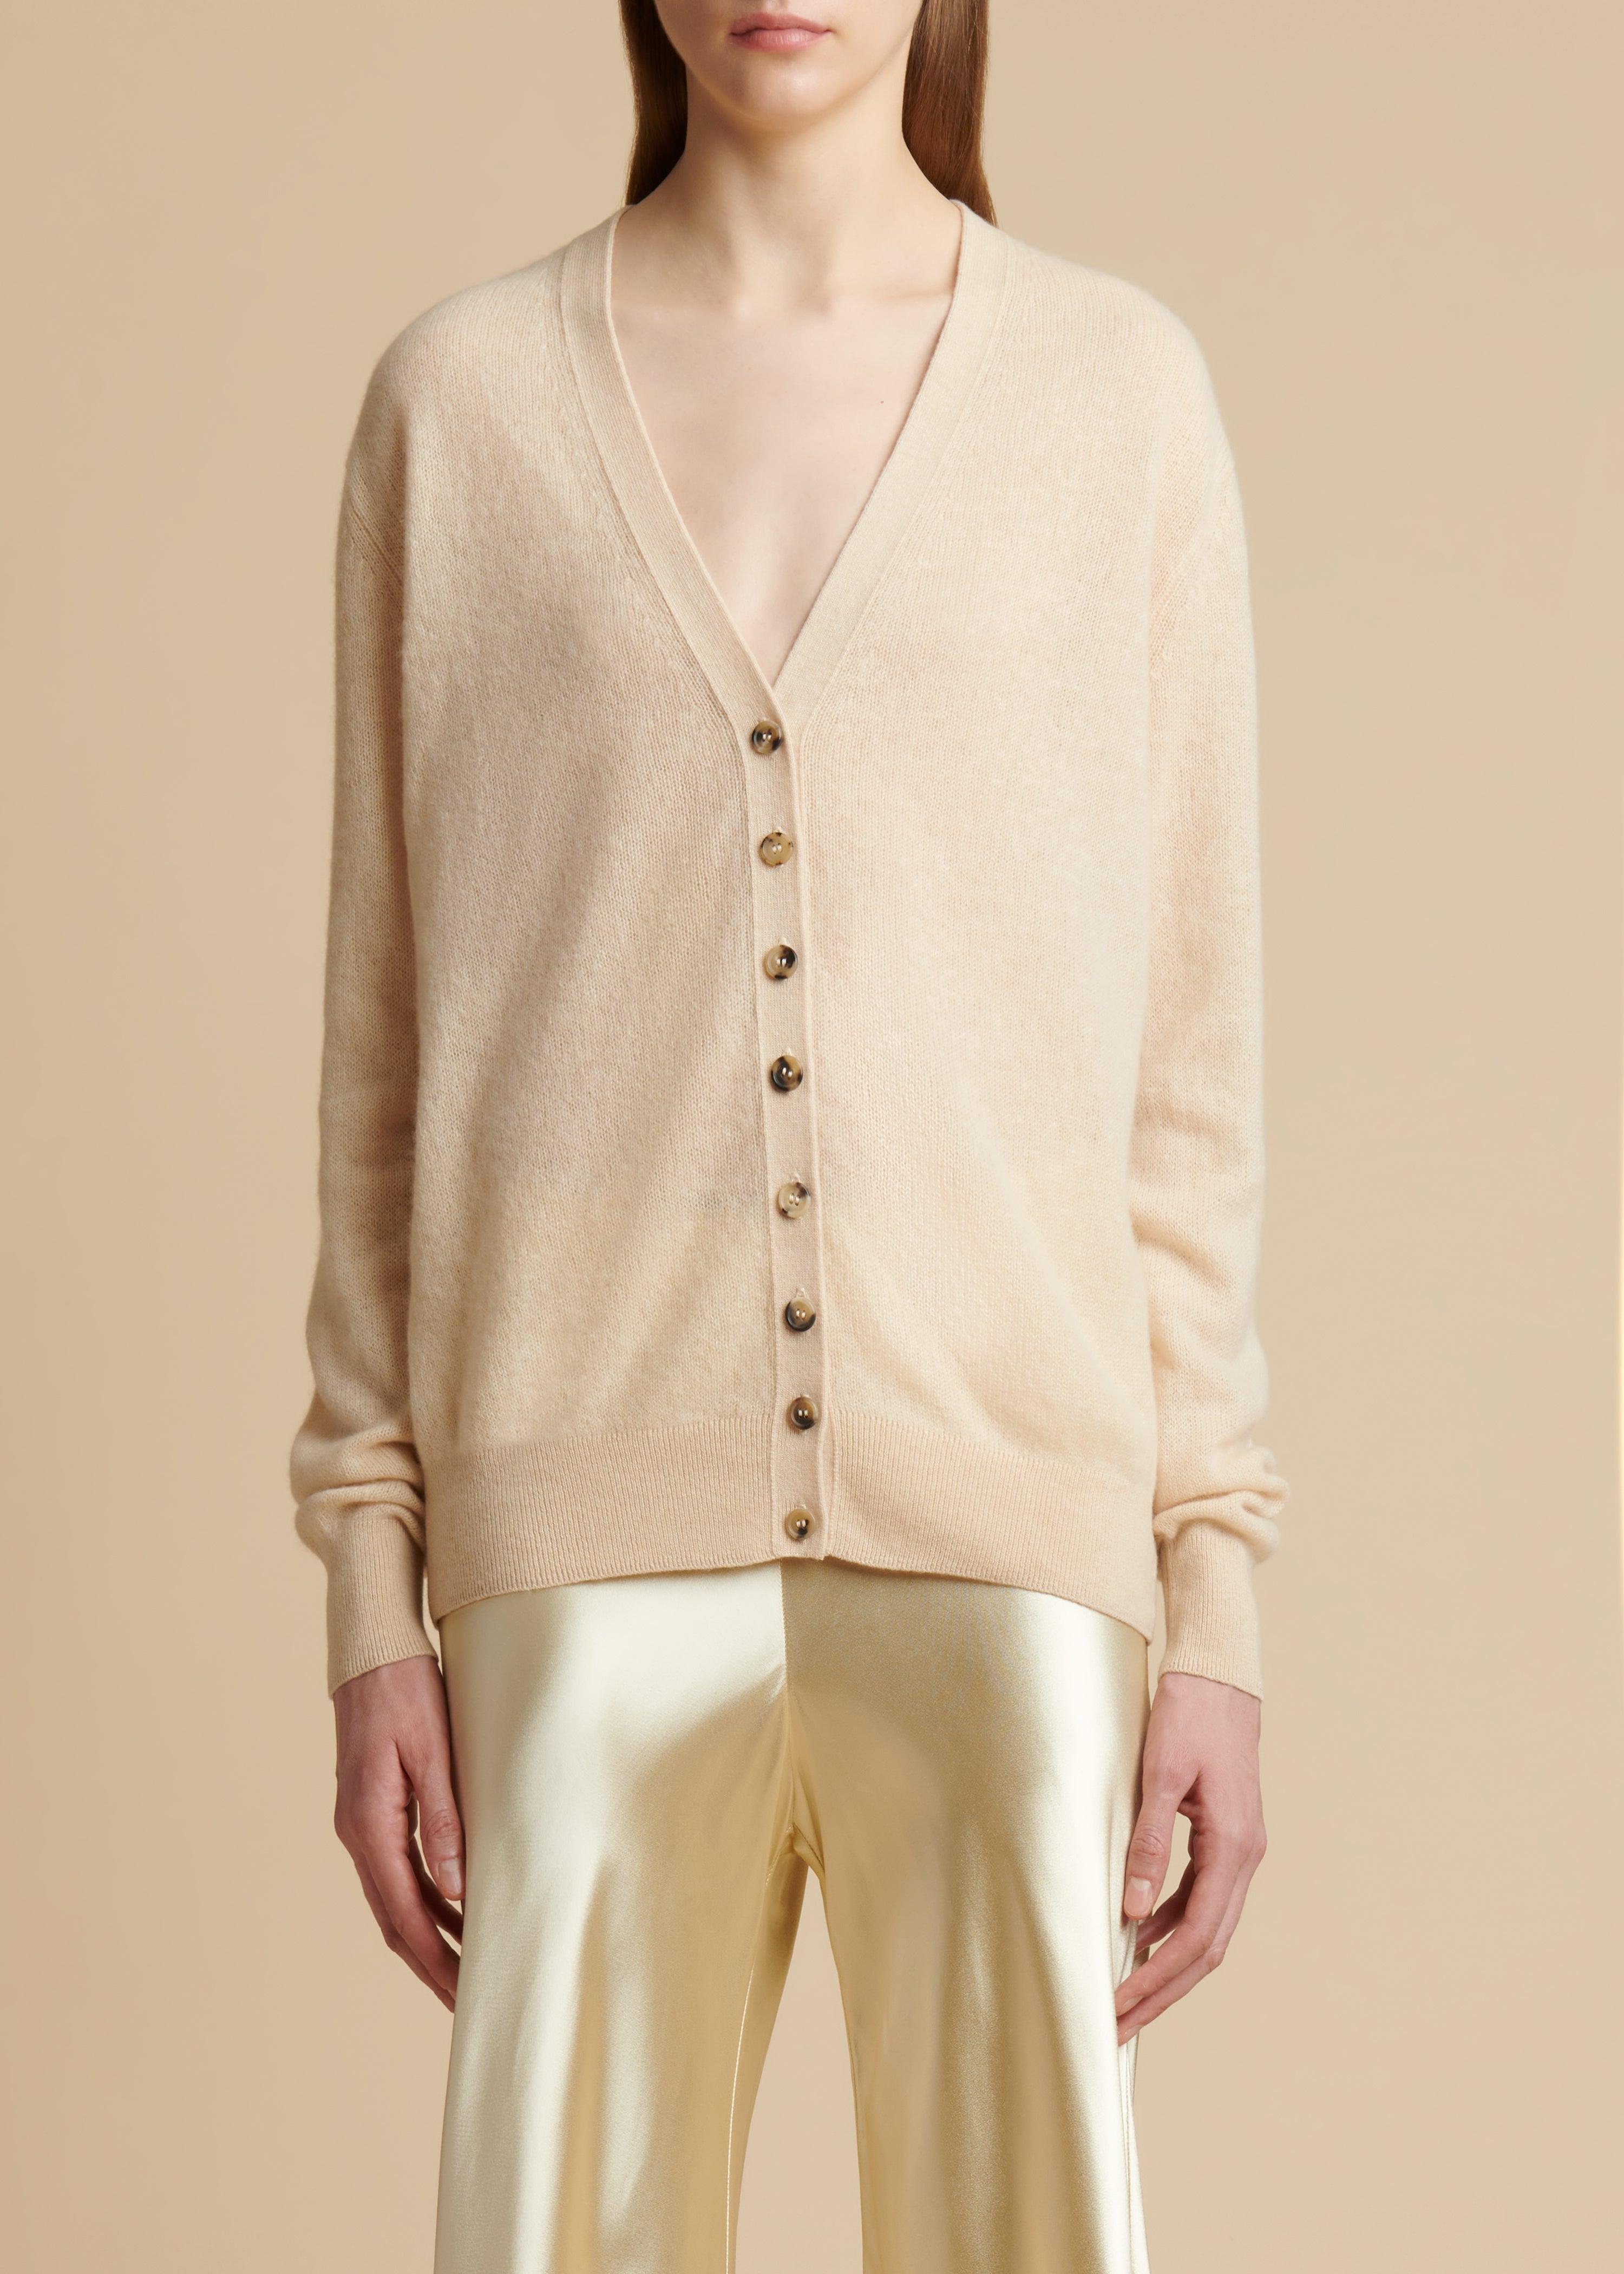 The Amelia Cardigan in Custard - The Iconic Issue